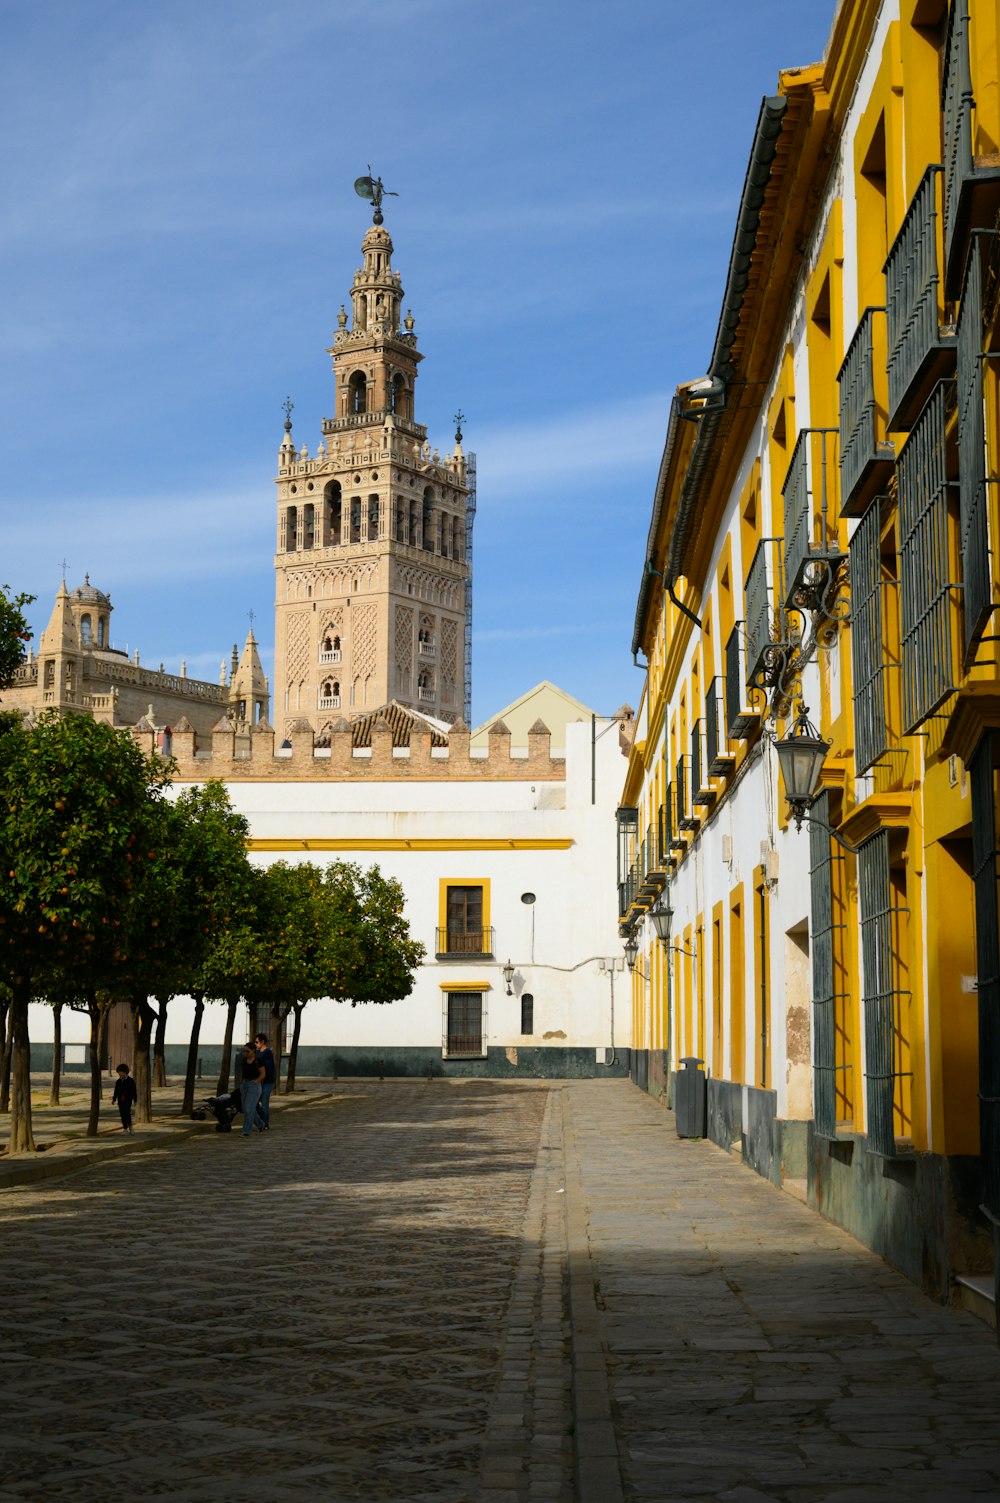 a yellow building with a clock tower in the background